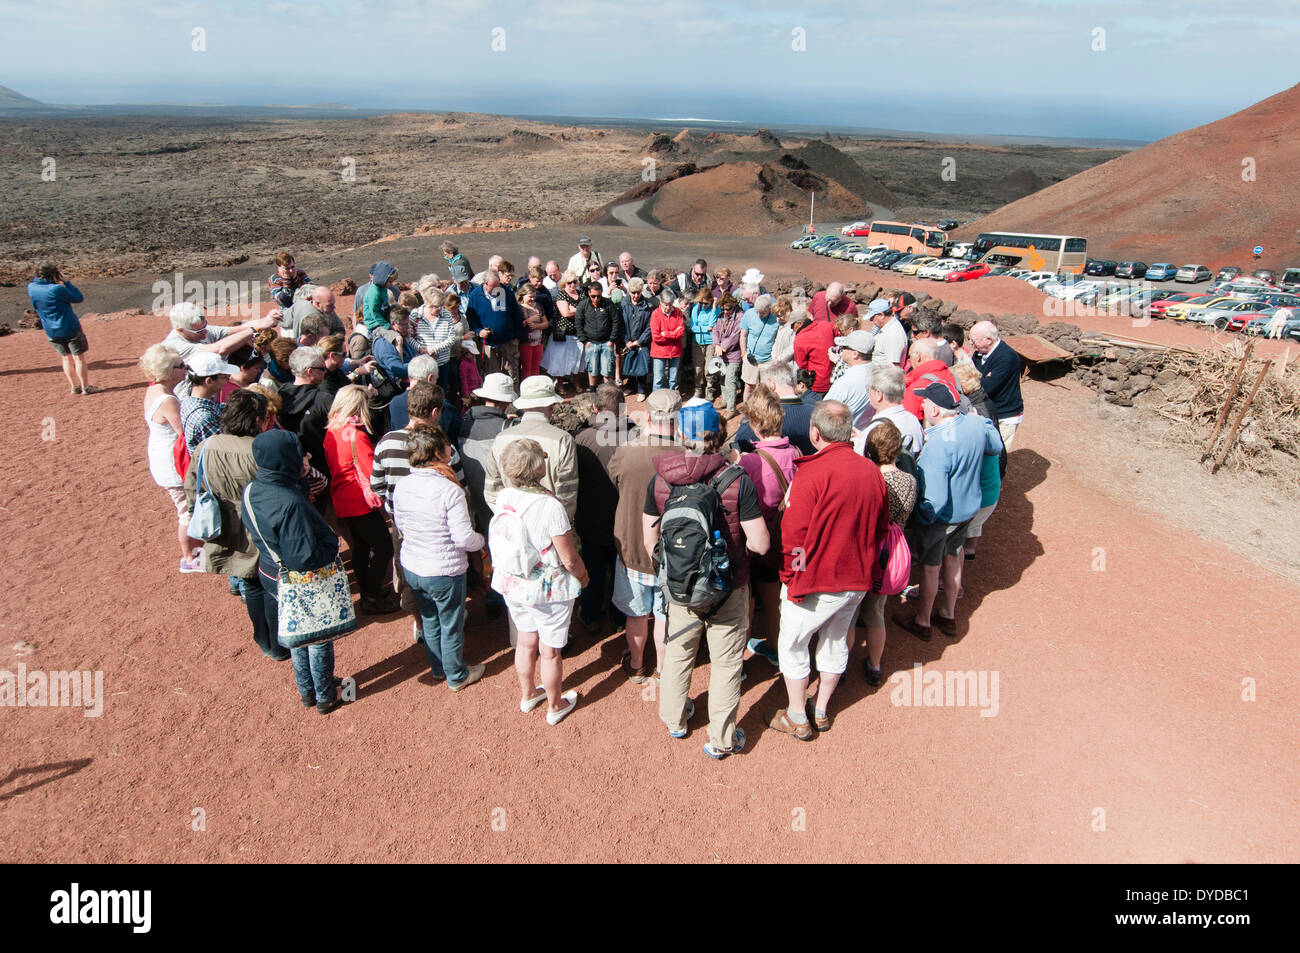 Lanzarote, Timanfaya National Park: A group of tourists watch a demonstration of the intense heat just below the surface. Stock Photo